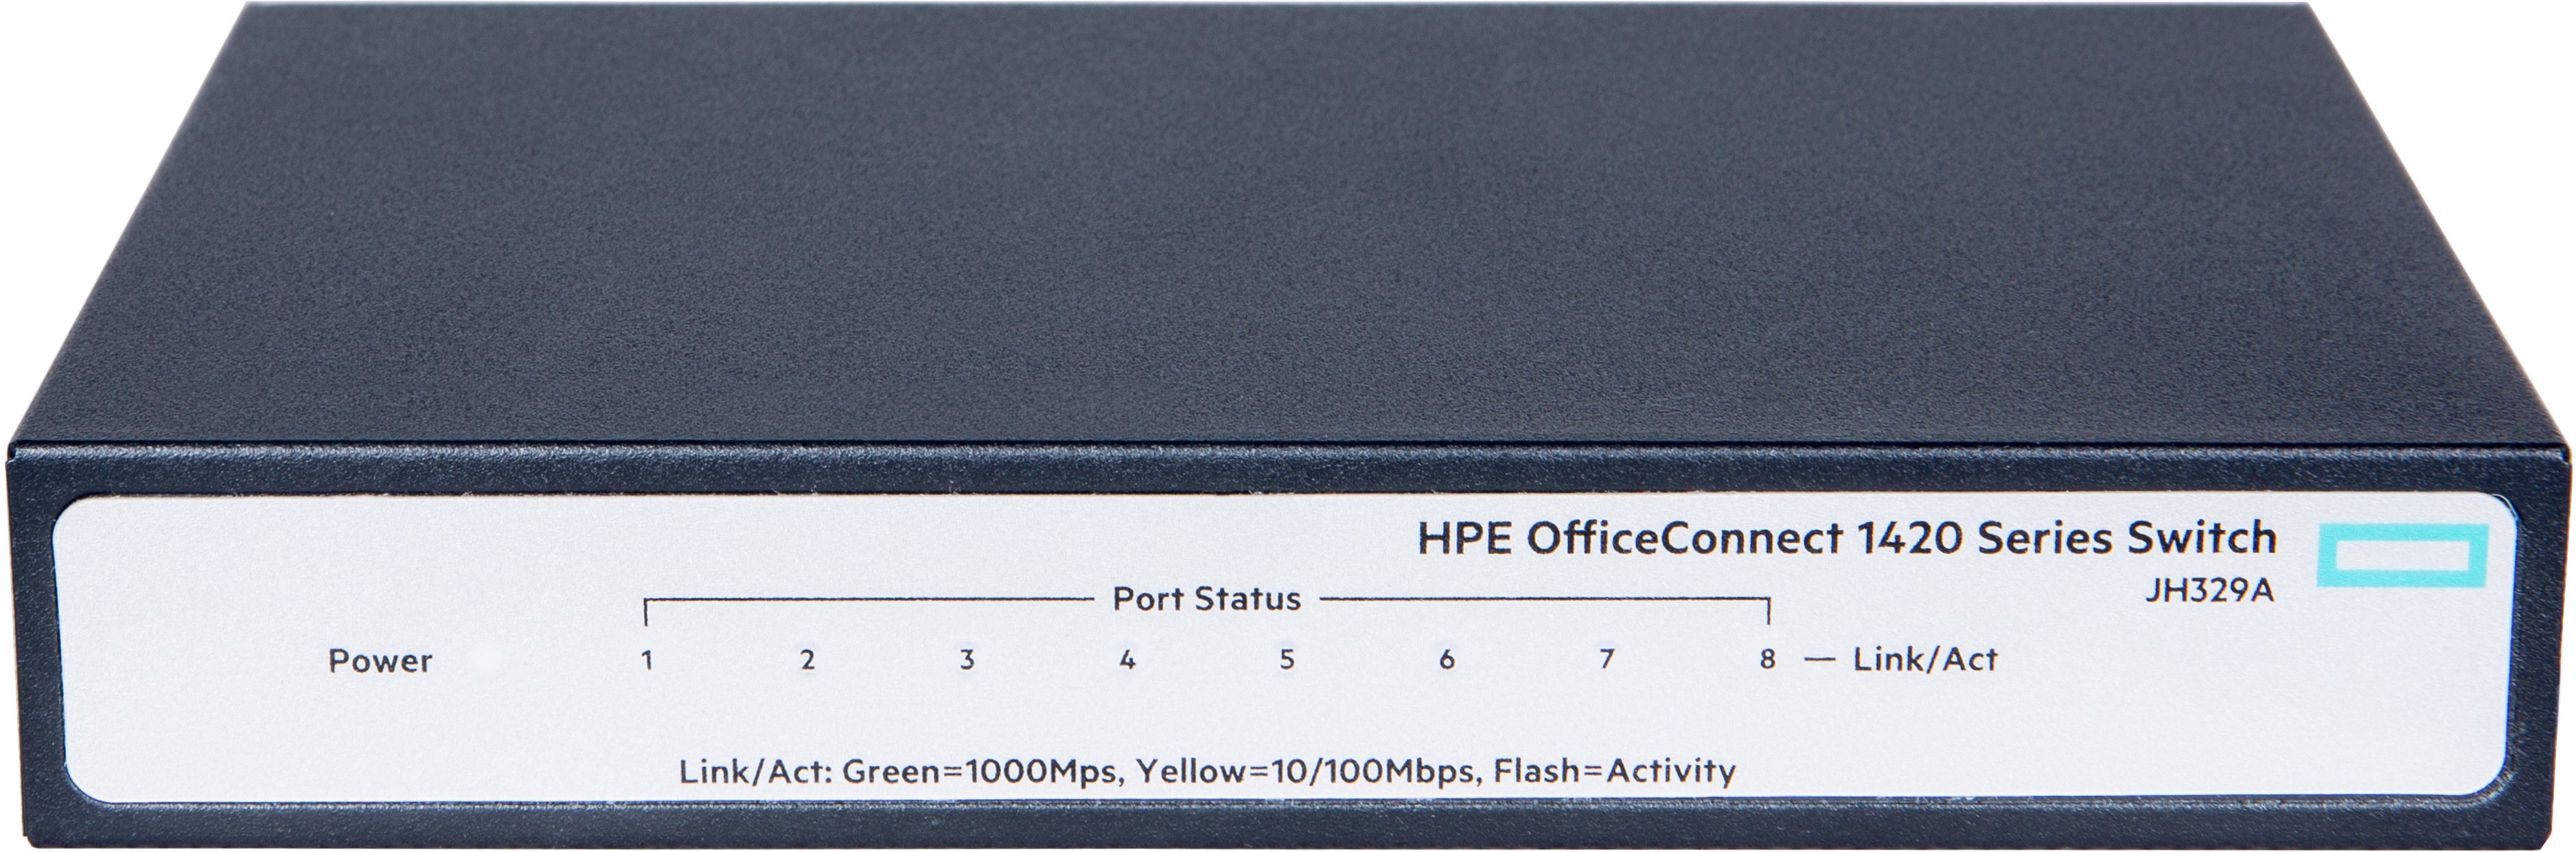 Hp Inc. Switch hpe officeconnect 1420 8g fara management 8x1000mbps-rj45